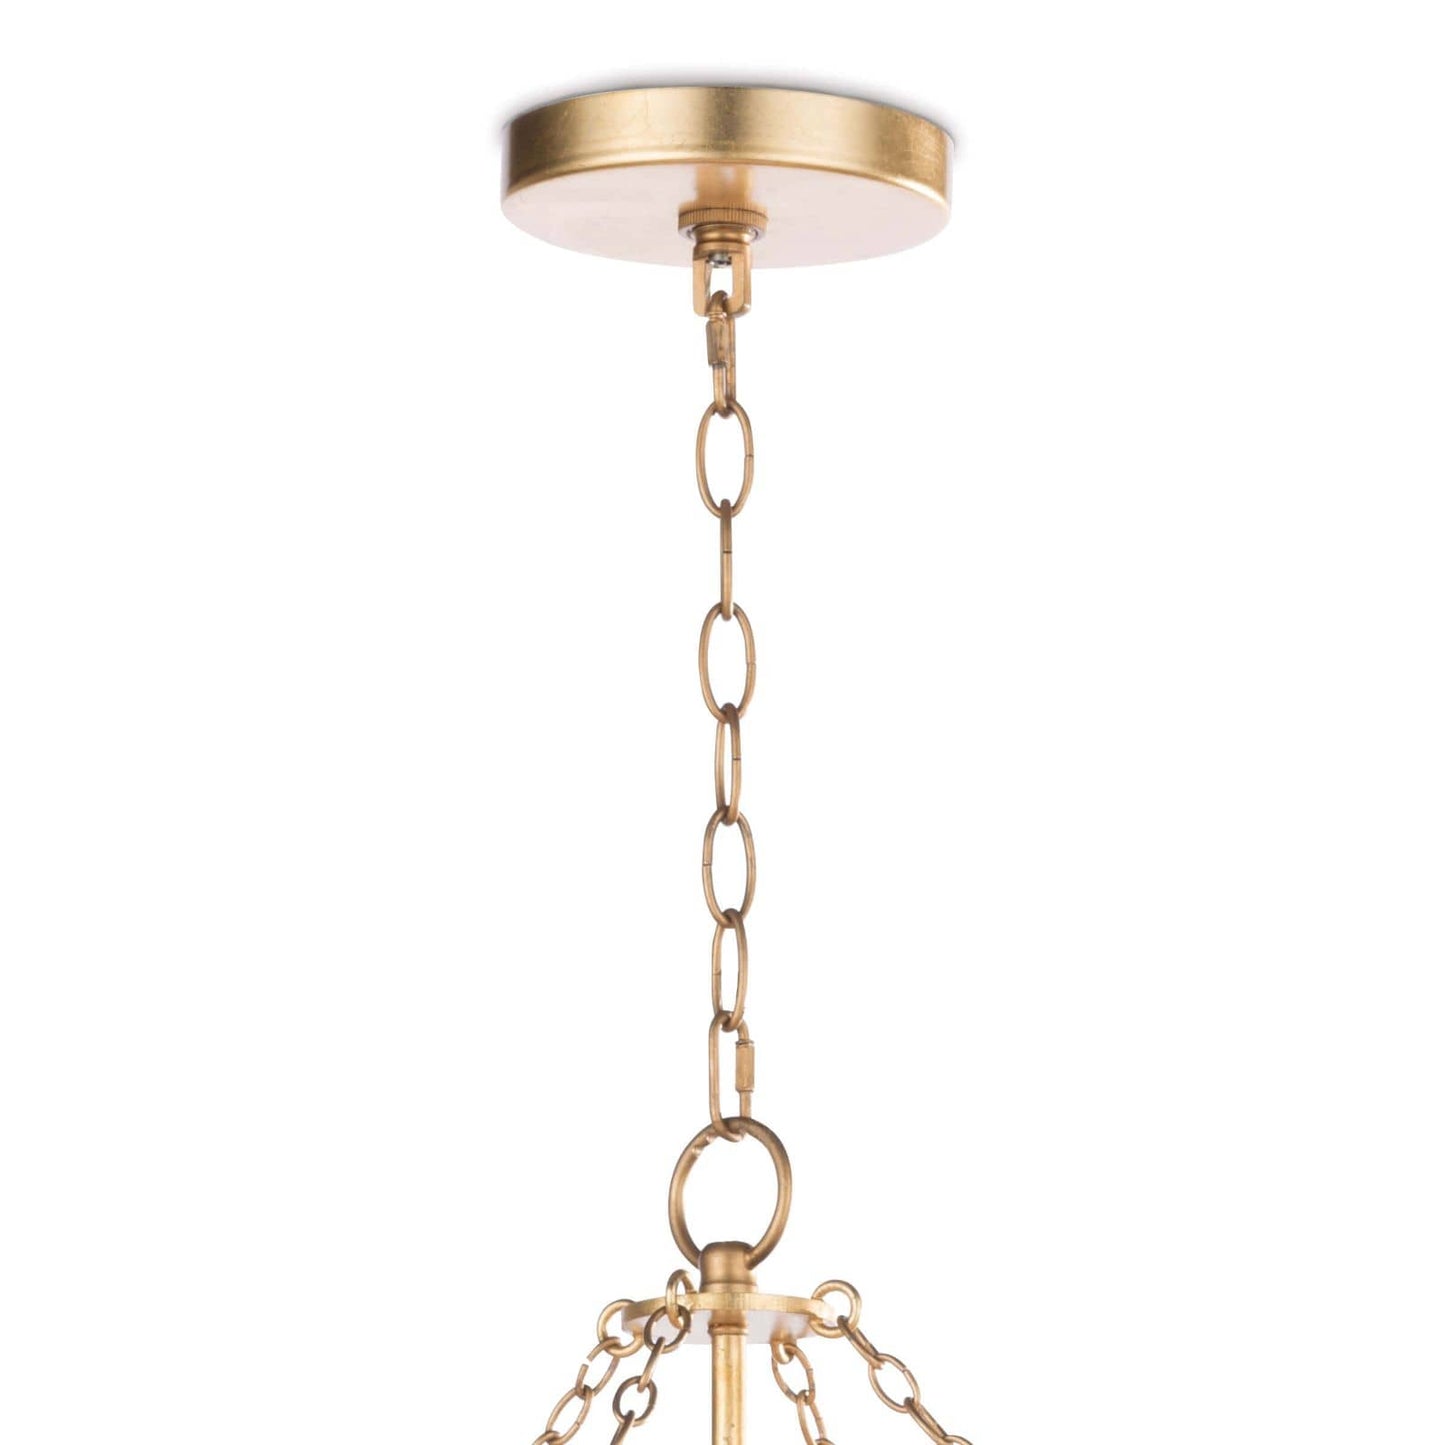 Cheshire Basin Chandelier in Gold Leaf by Regina Andrew